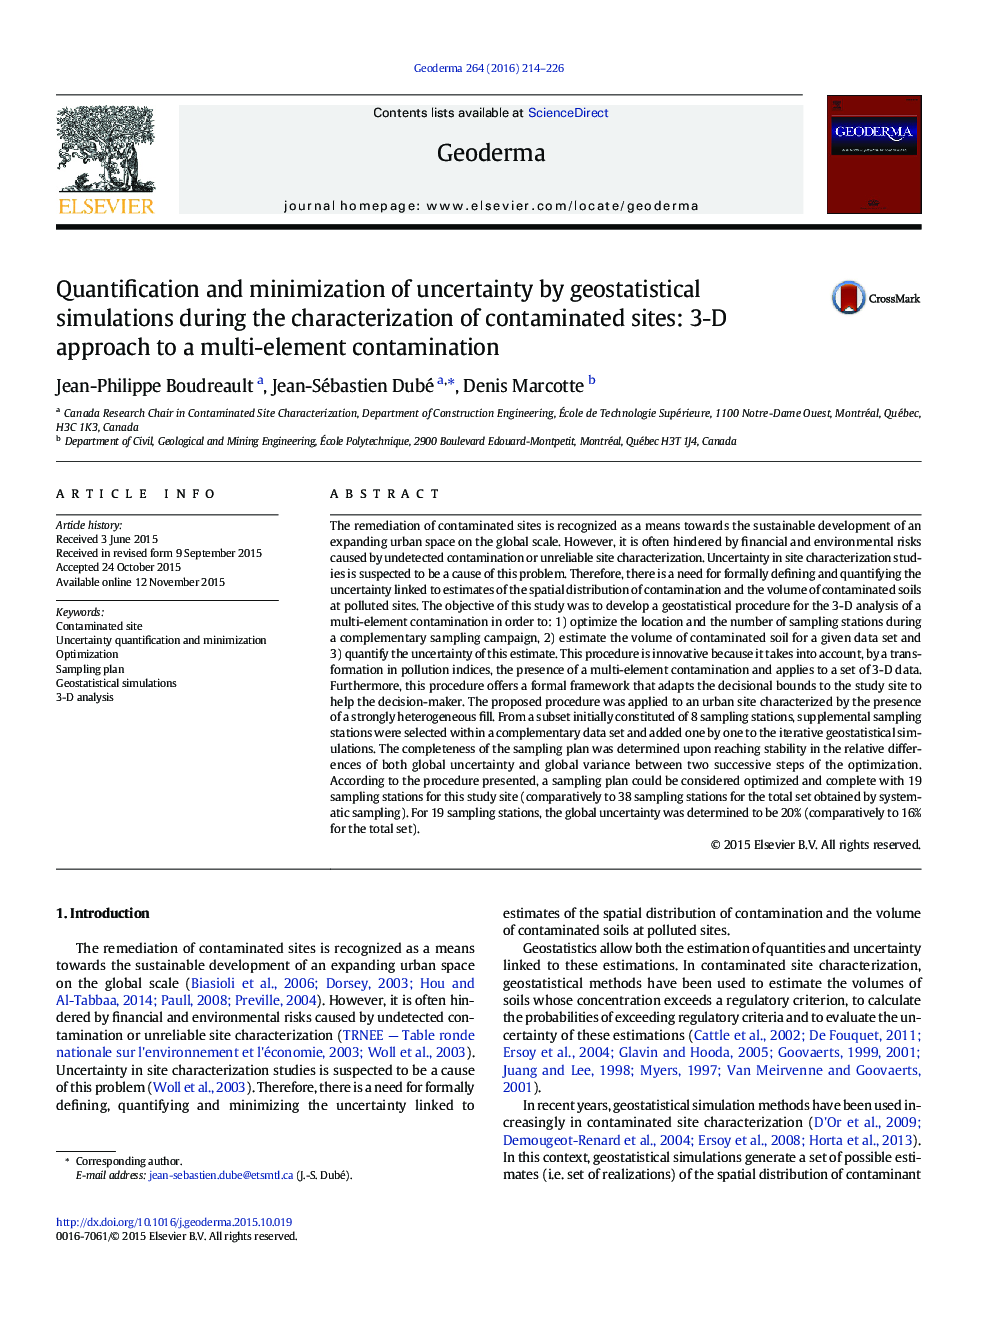 Quantification and minimization of uncertainty by geostatistical simulations during the characterization of contaminated sites: 3-D approach to a multi-element contamination